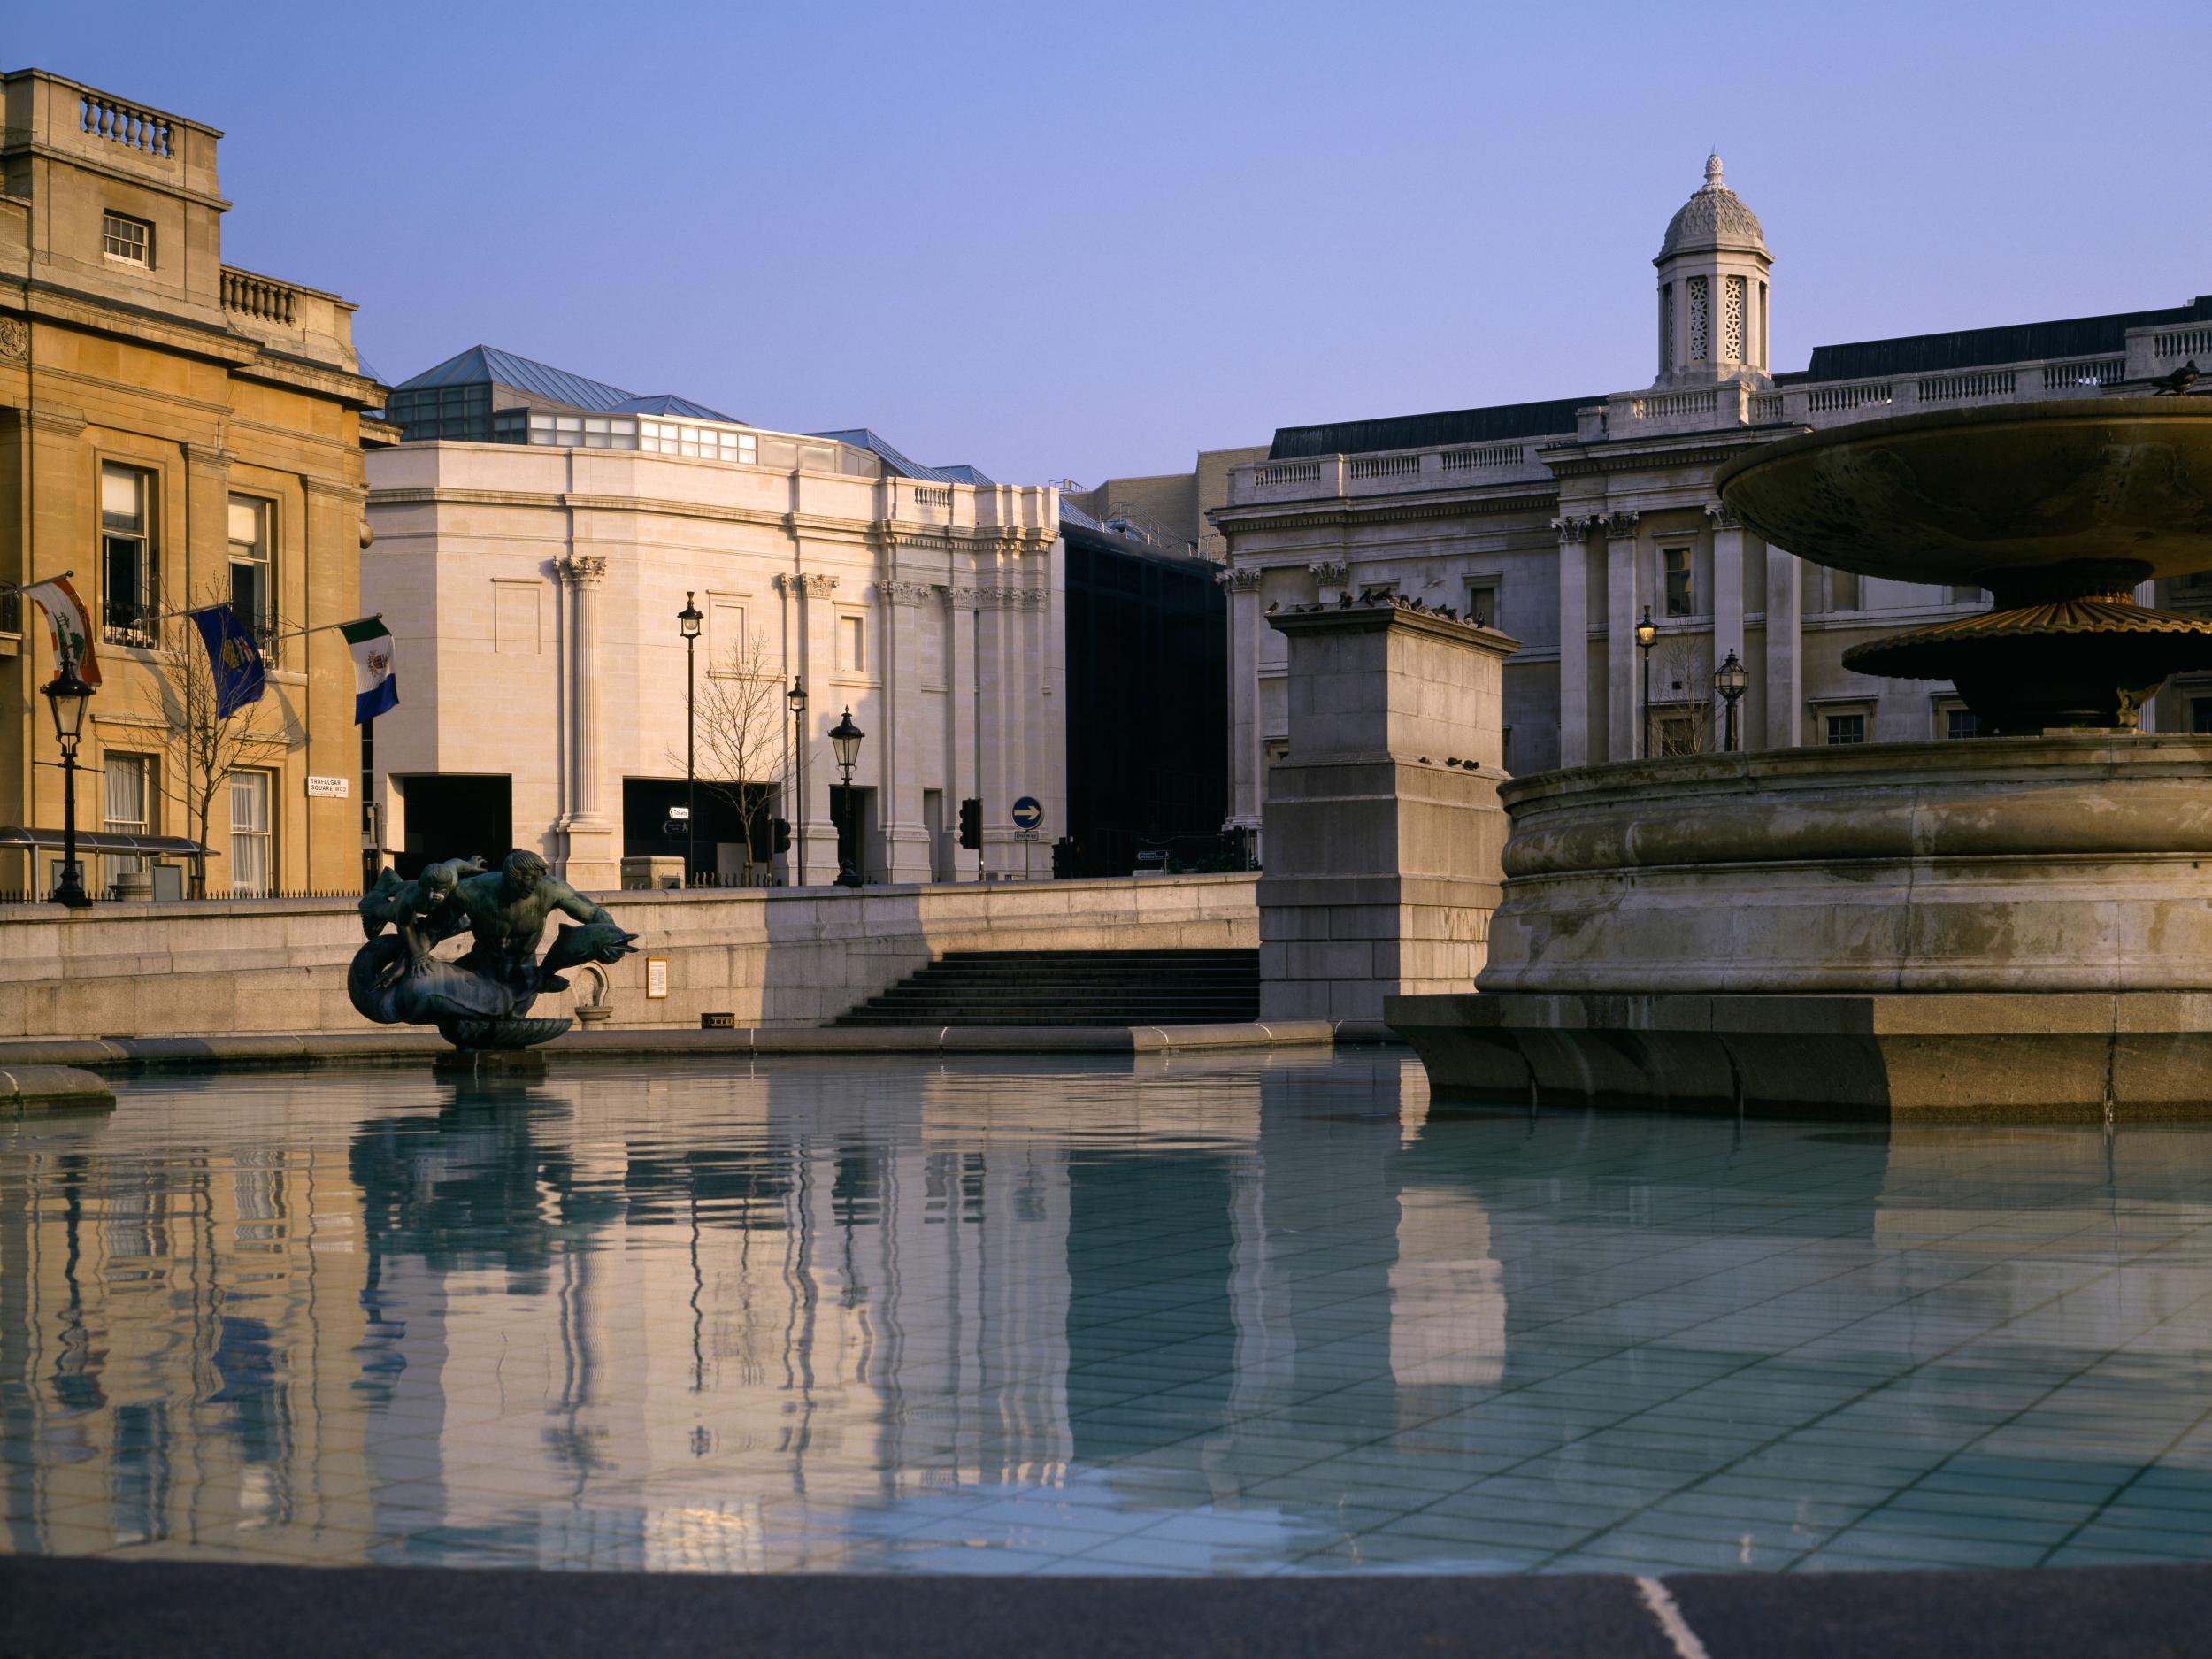 In 1991 he unveiled the Sainsbury Wing, an addition to the National Gallery in London